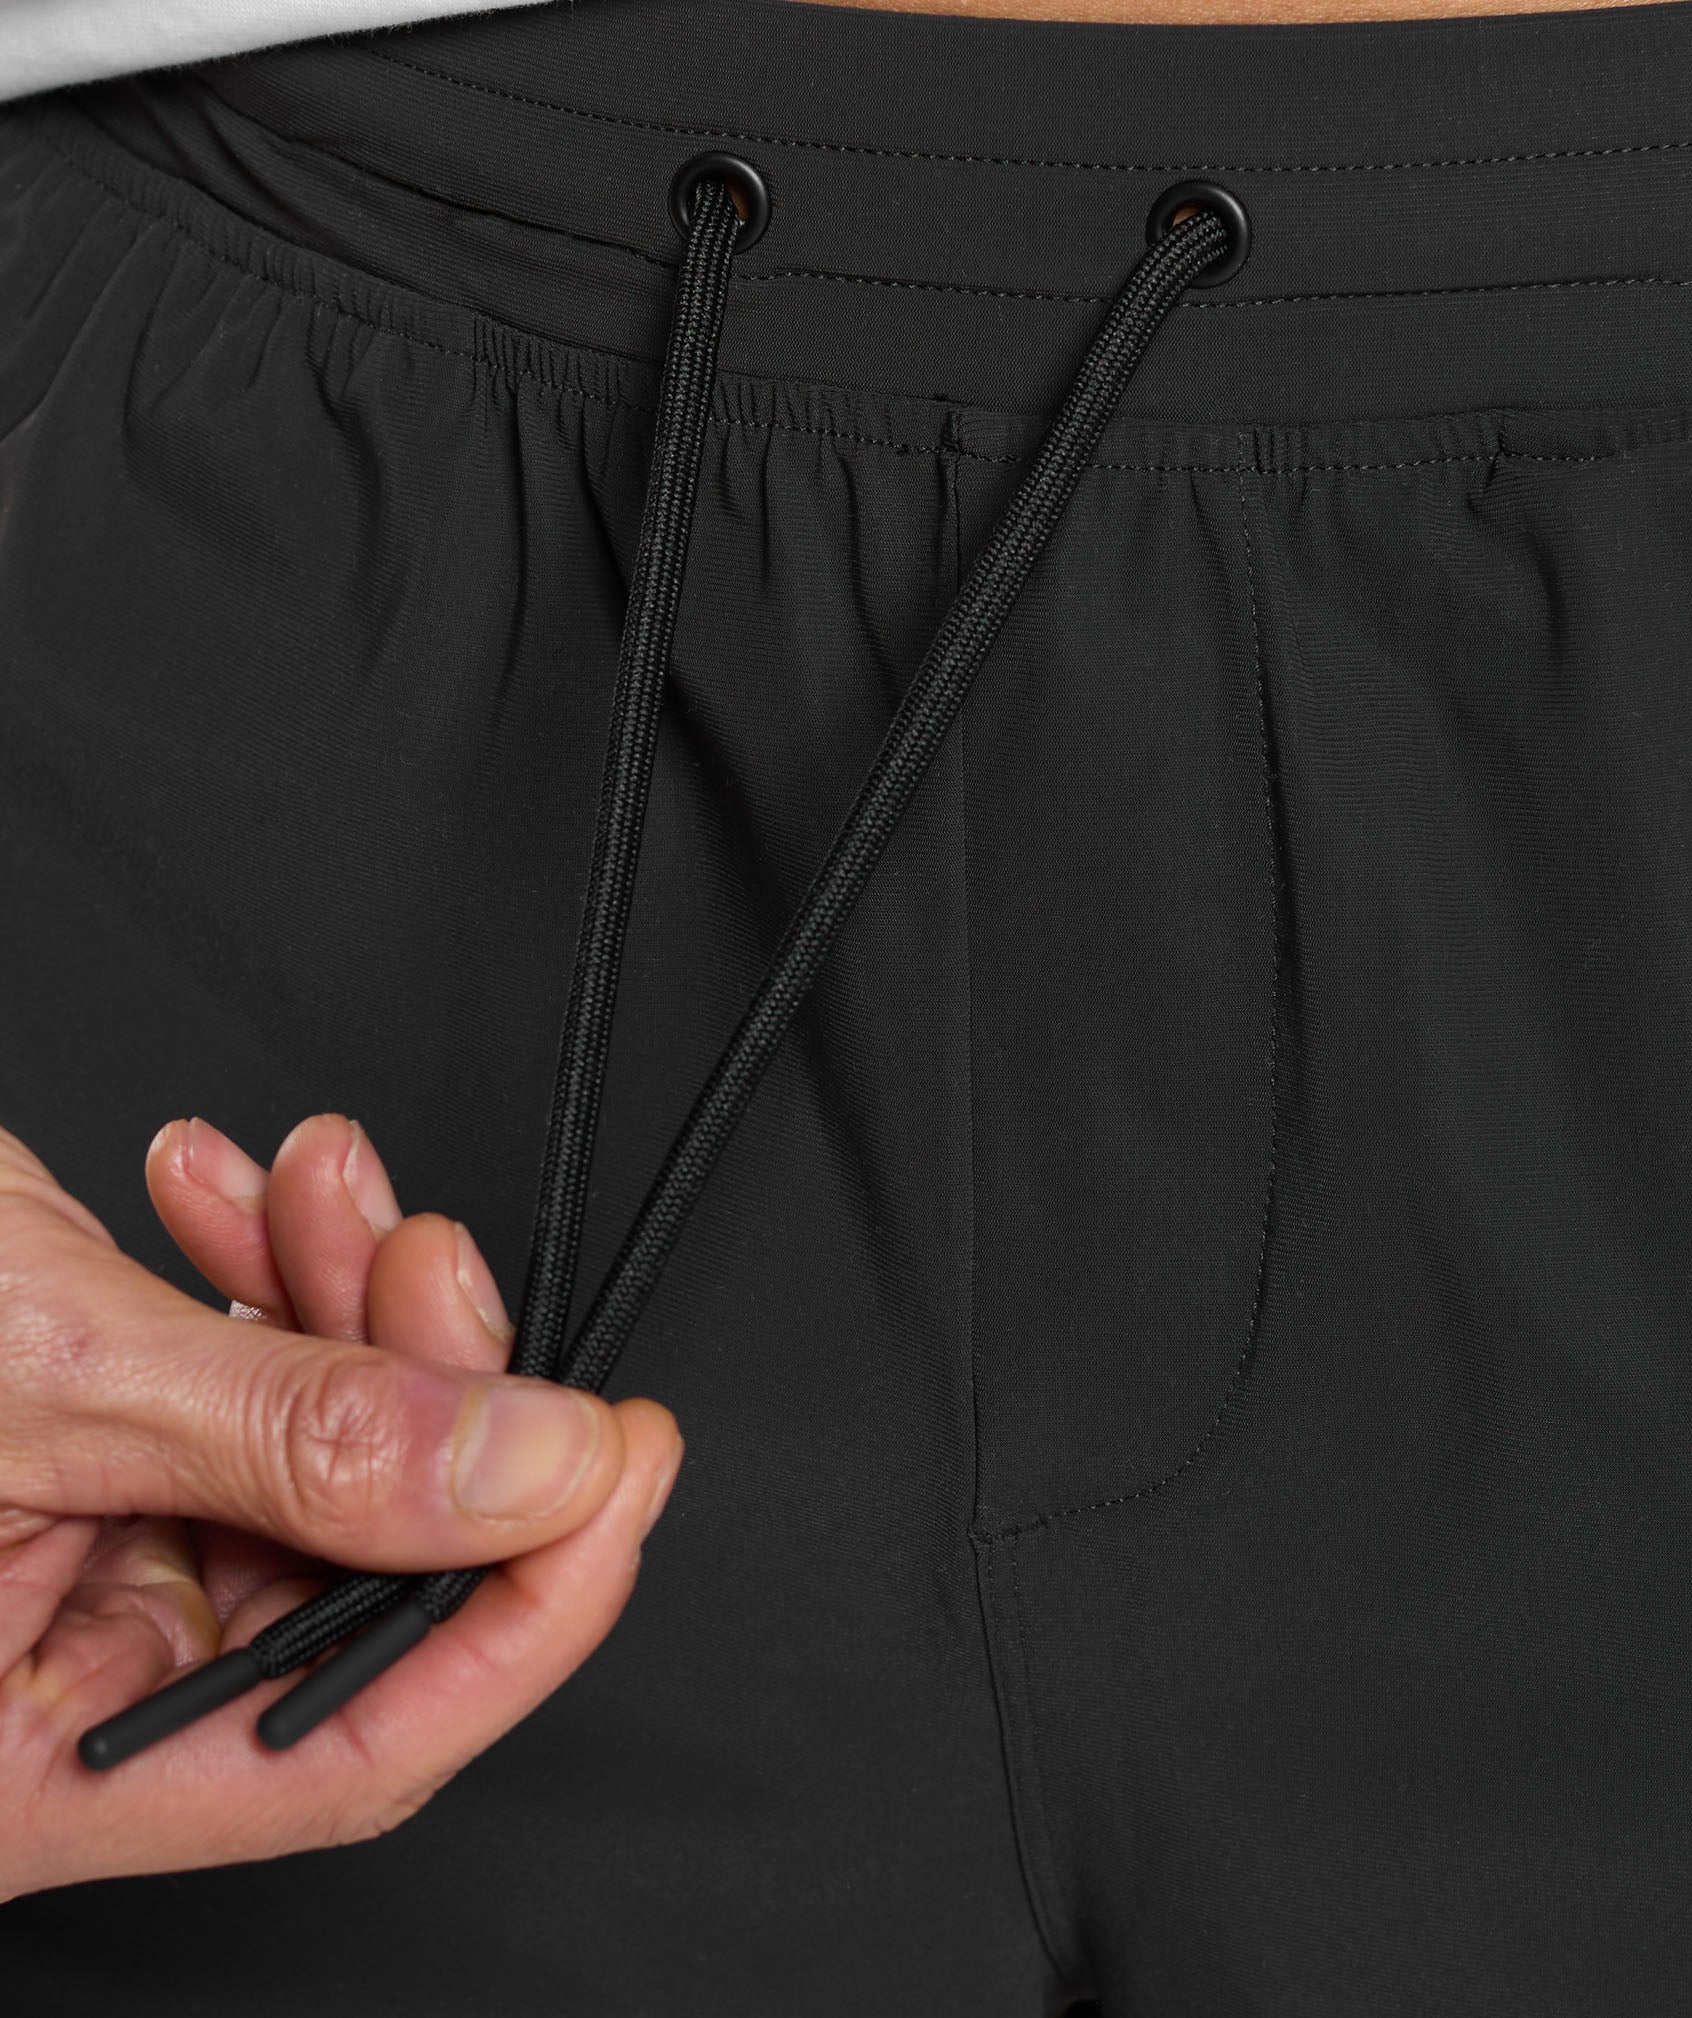 Rest Day 6" Cargo Shorts in Black - view 6